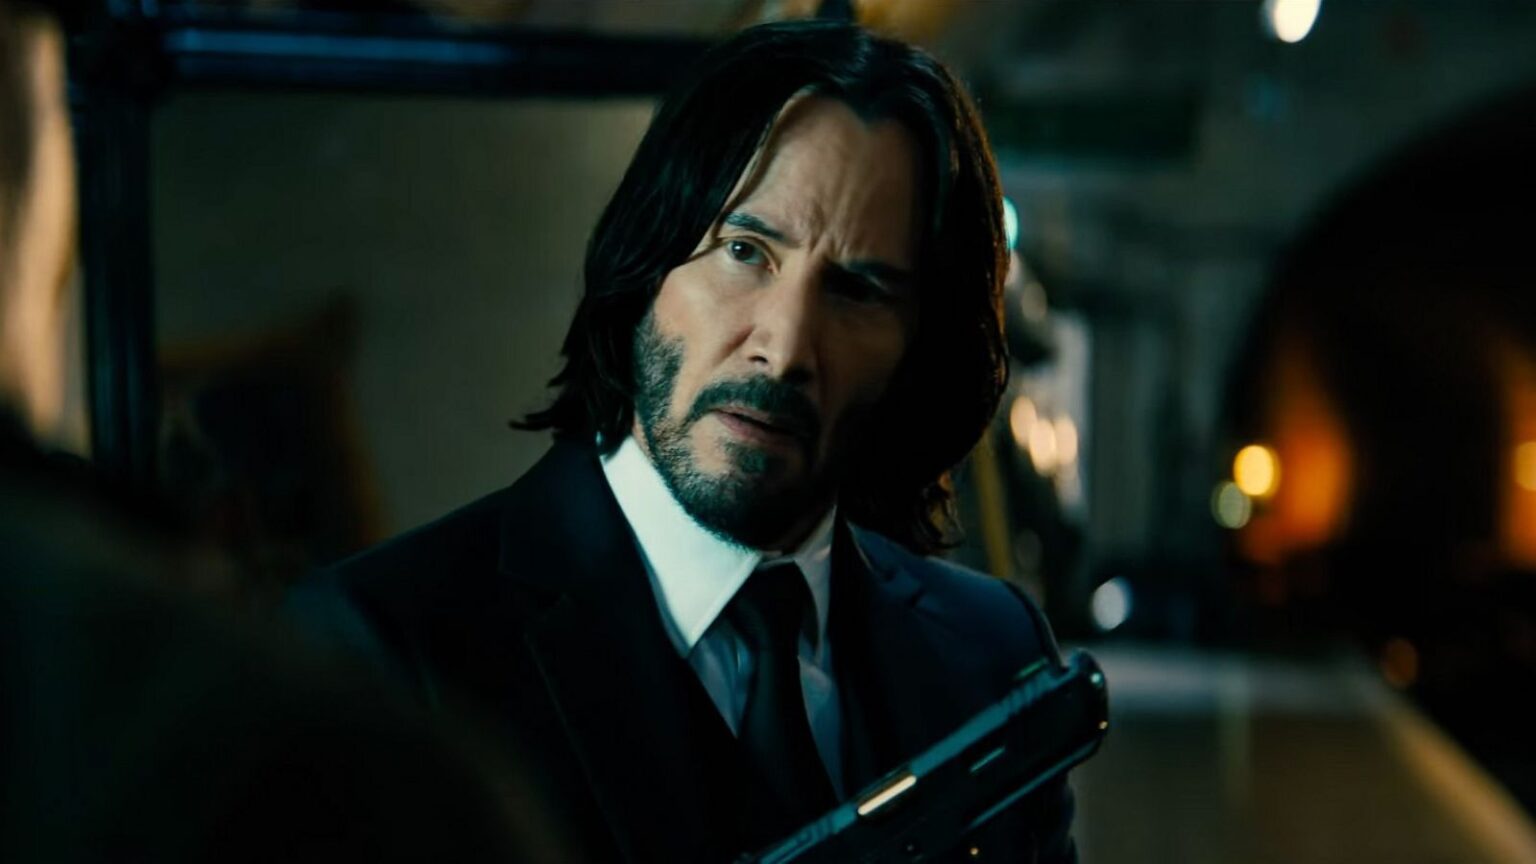 'John Wick: Chapter 4' is an excellent choice for those who love films with many breathtaking action scenes. Here are the best related games.